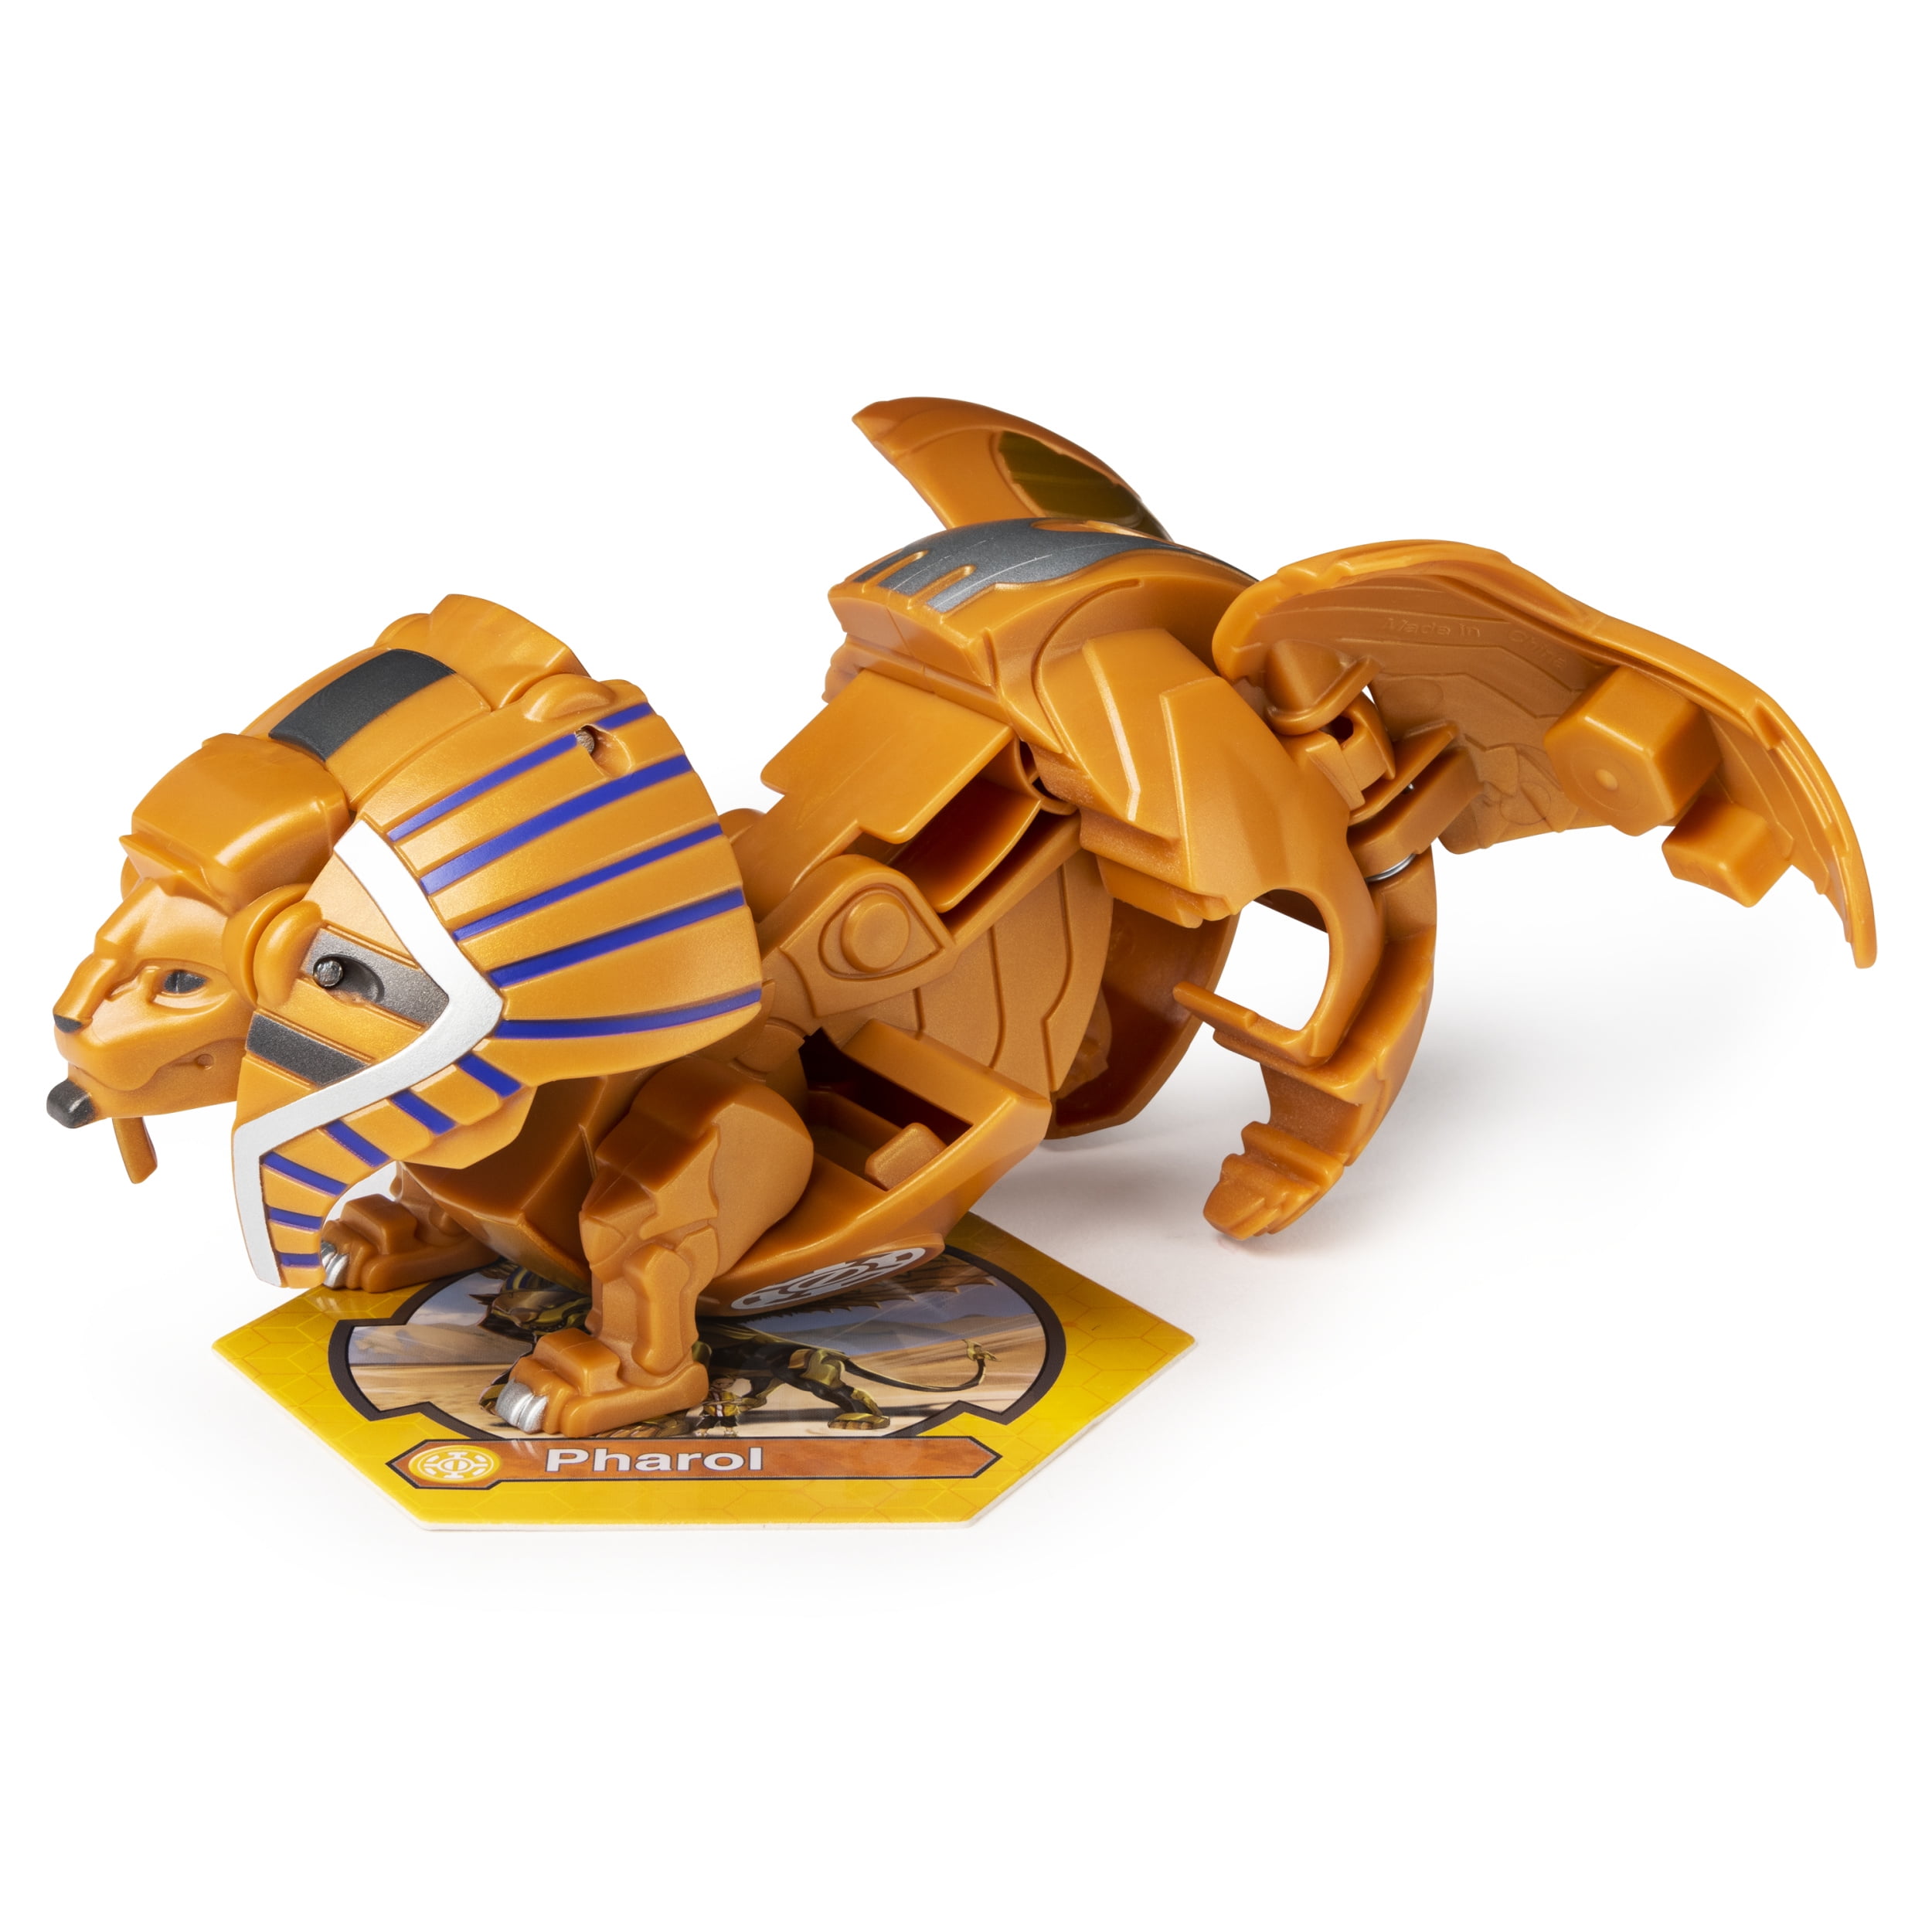 Pharol, Armored Alliance Jumbo Collectible Transforming Figure, for Ages 6 and Up - Walmart.com